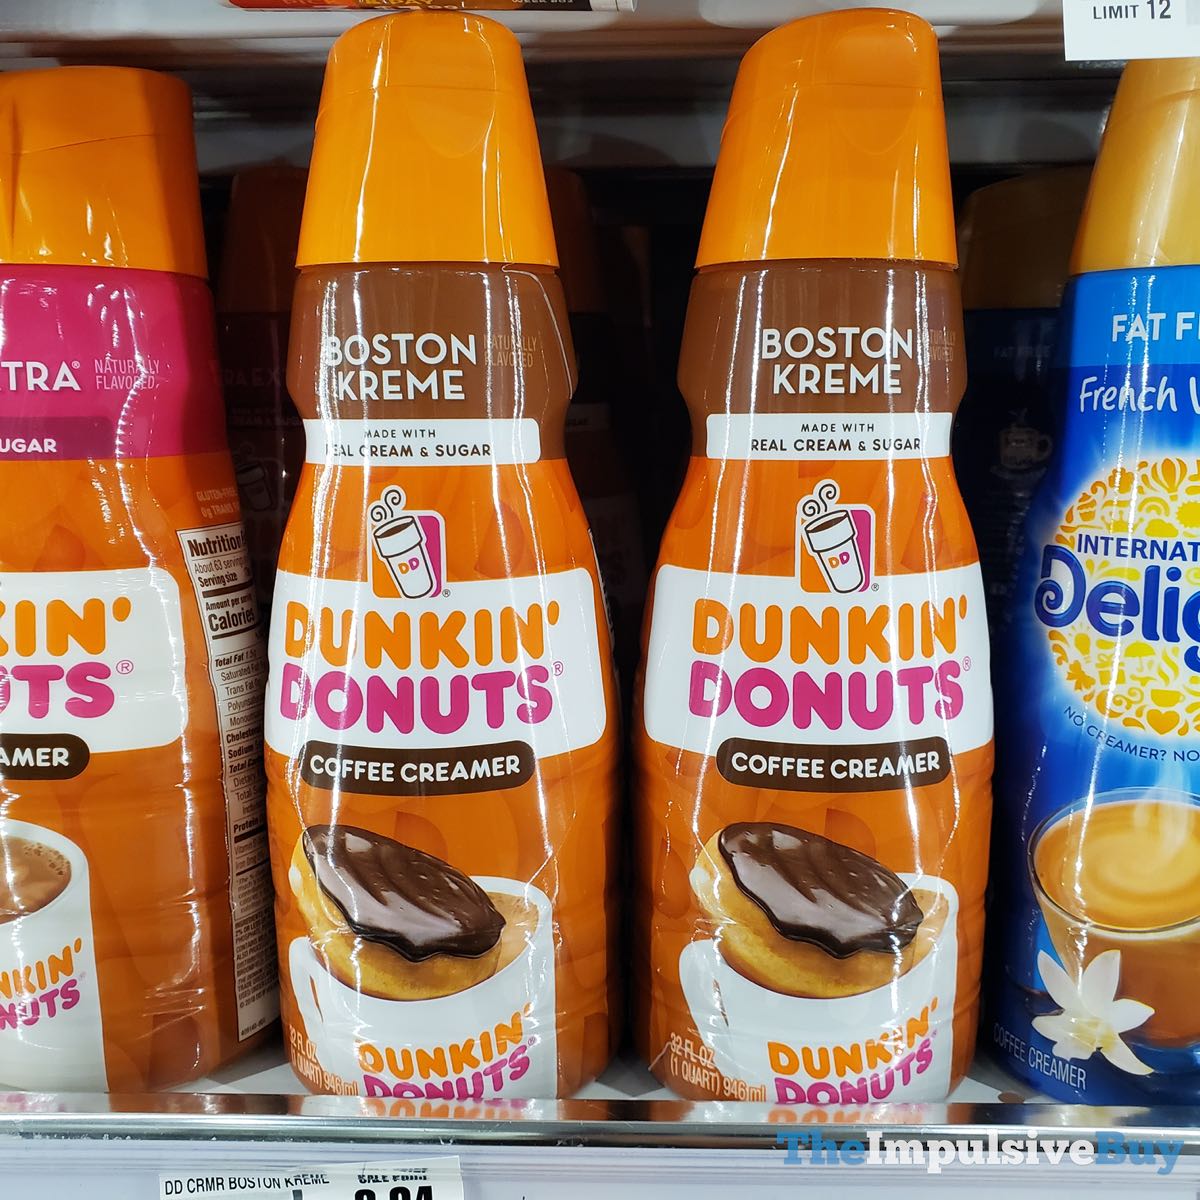 SPOTTED Dunkin' Donuts Boston Kreme and Coffee Cake